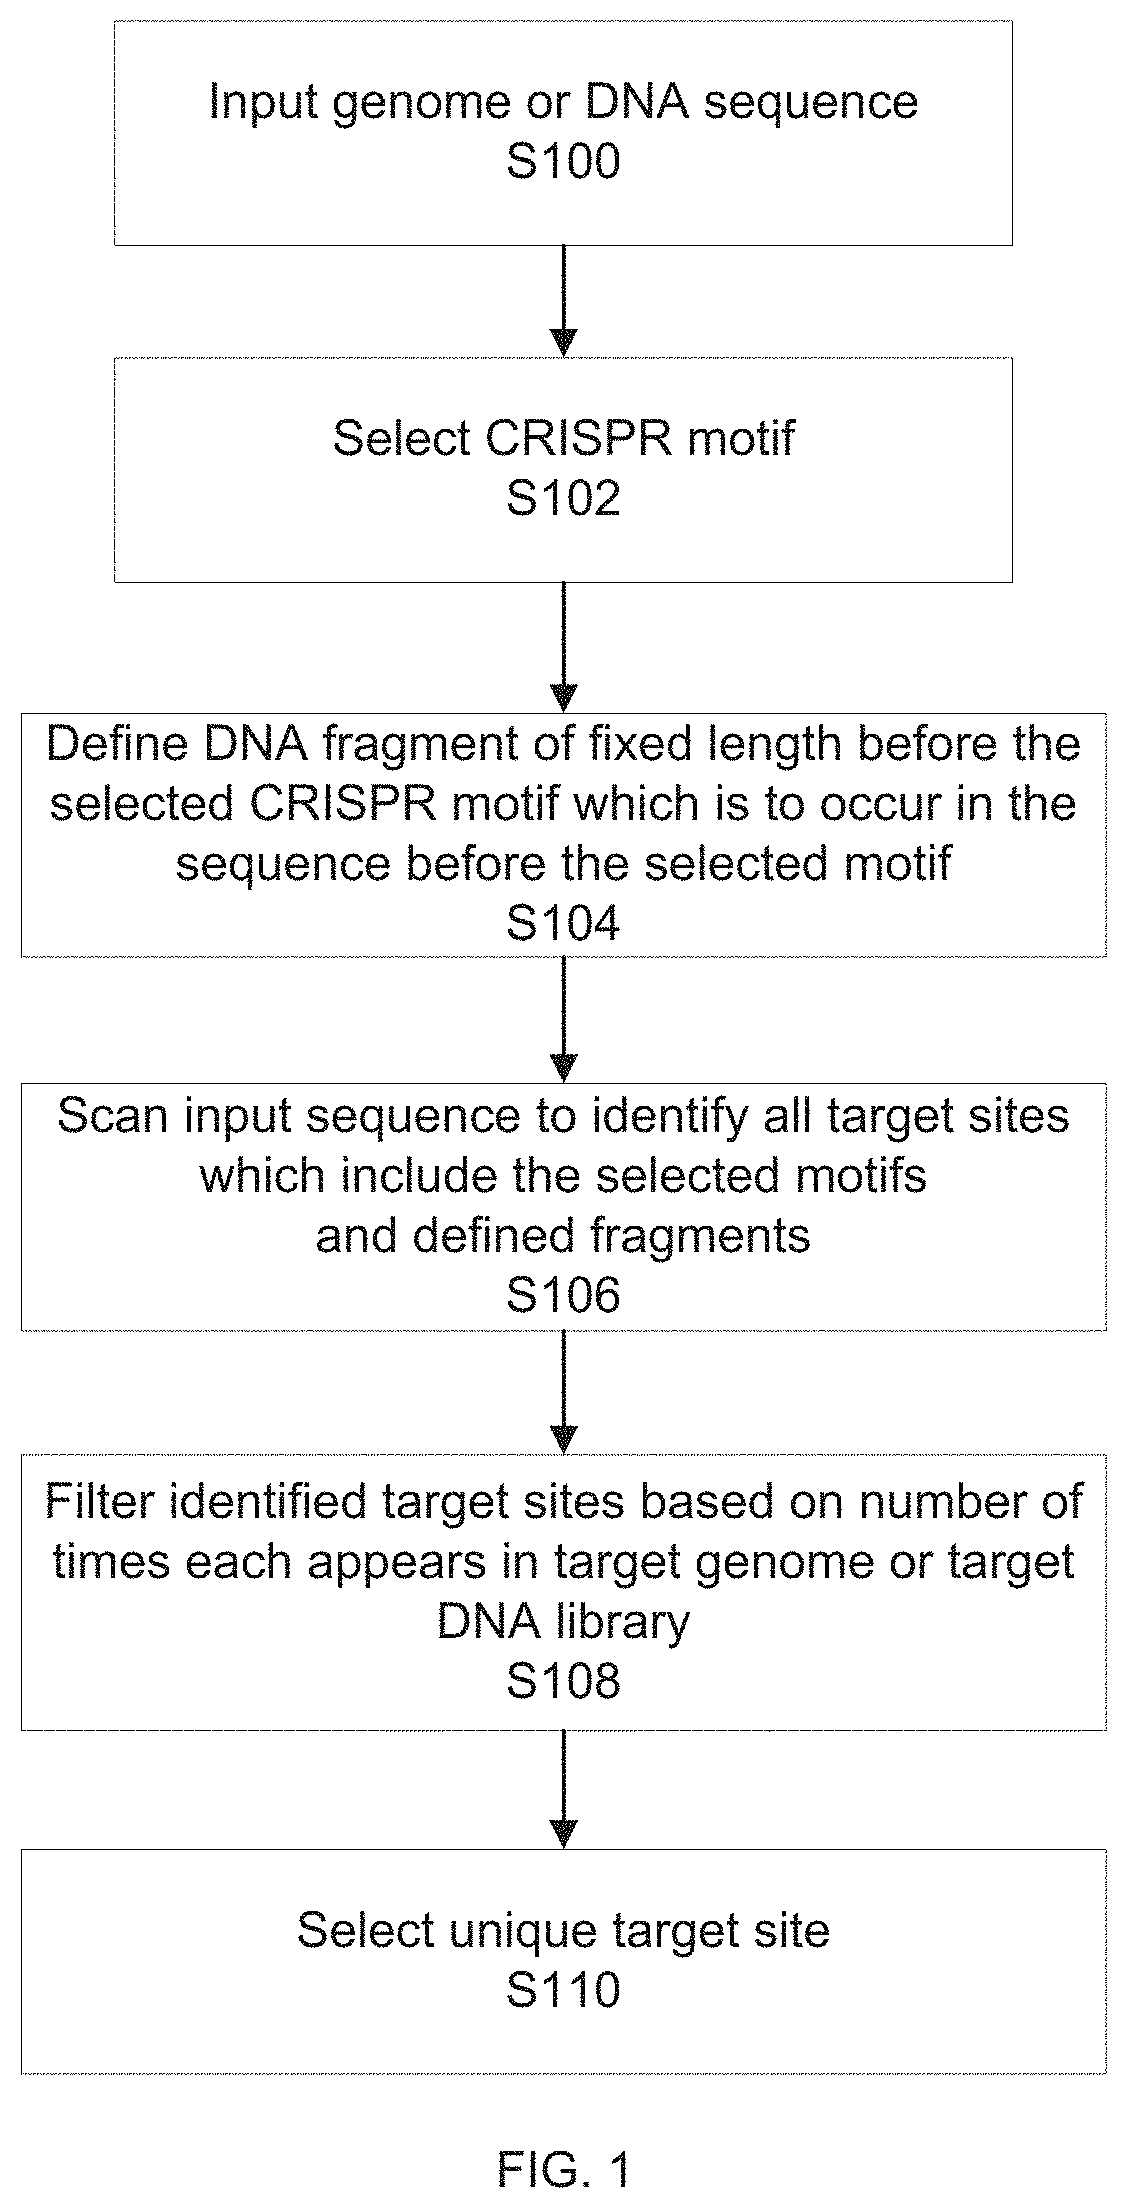 Unbiased identification of double-strand breaks and genomic rearrangement by genome-wide insert capture sequencing